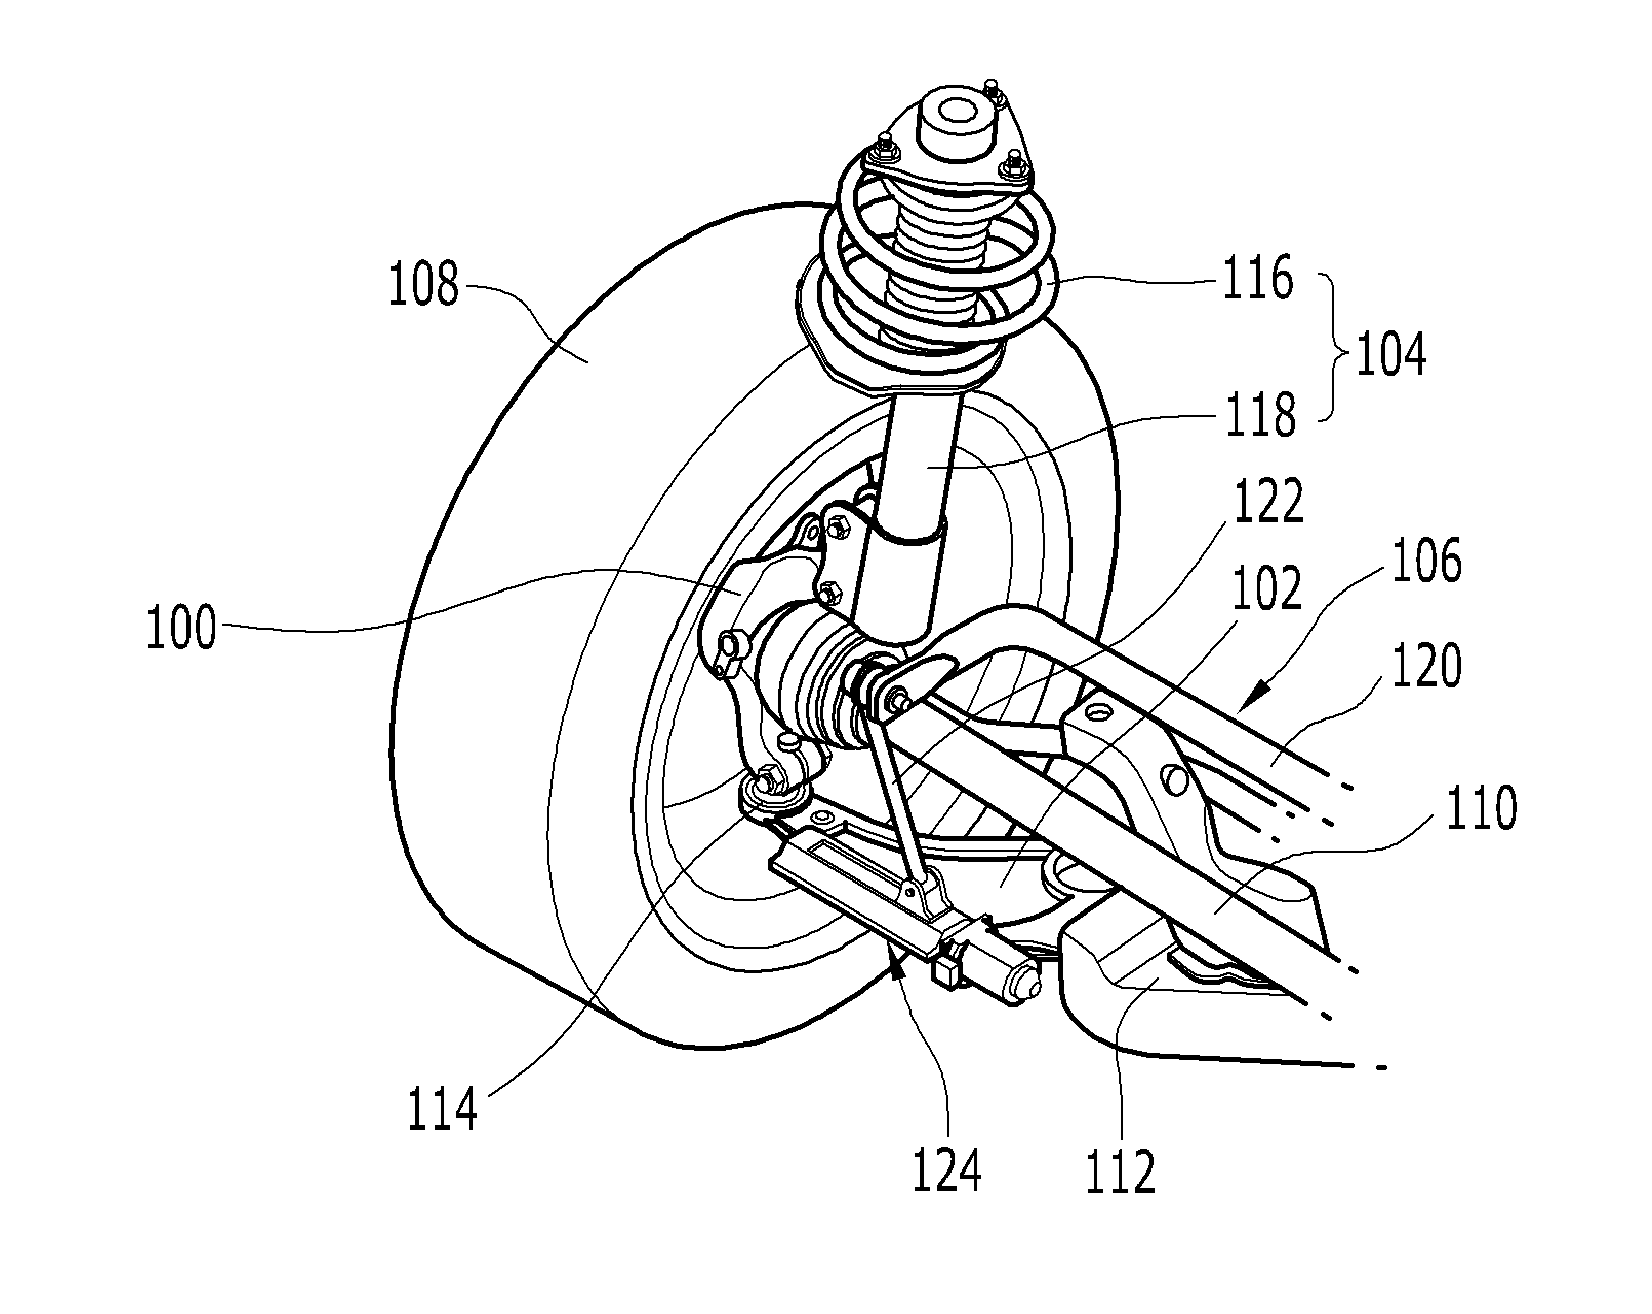 Active Roll Control System for Vehicle